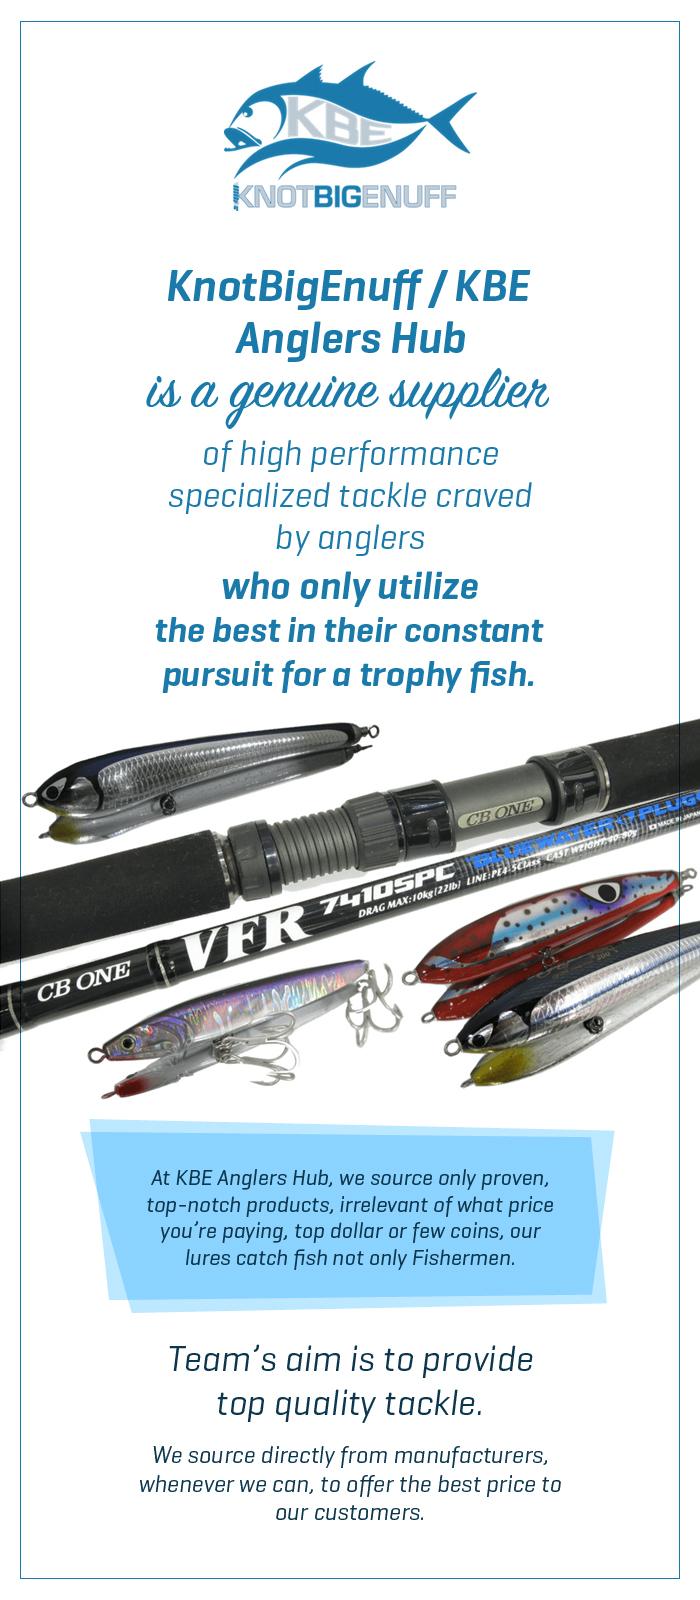 Get a Wide Range of Fishing Tackle Products from KnotBigEnuff